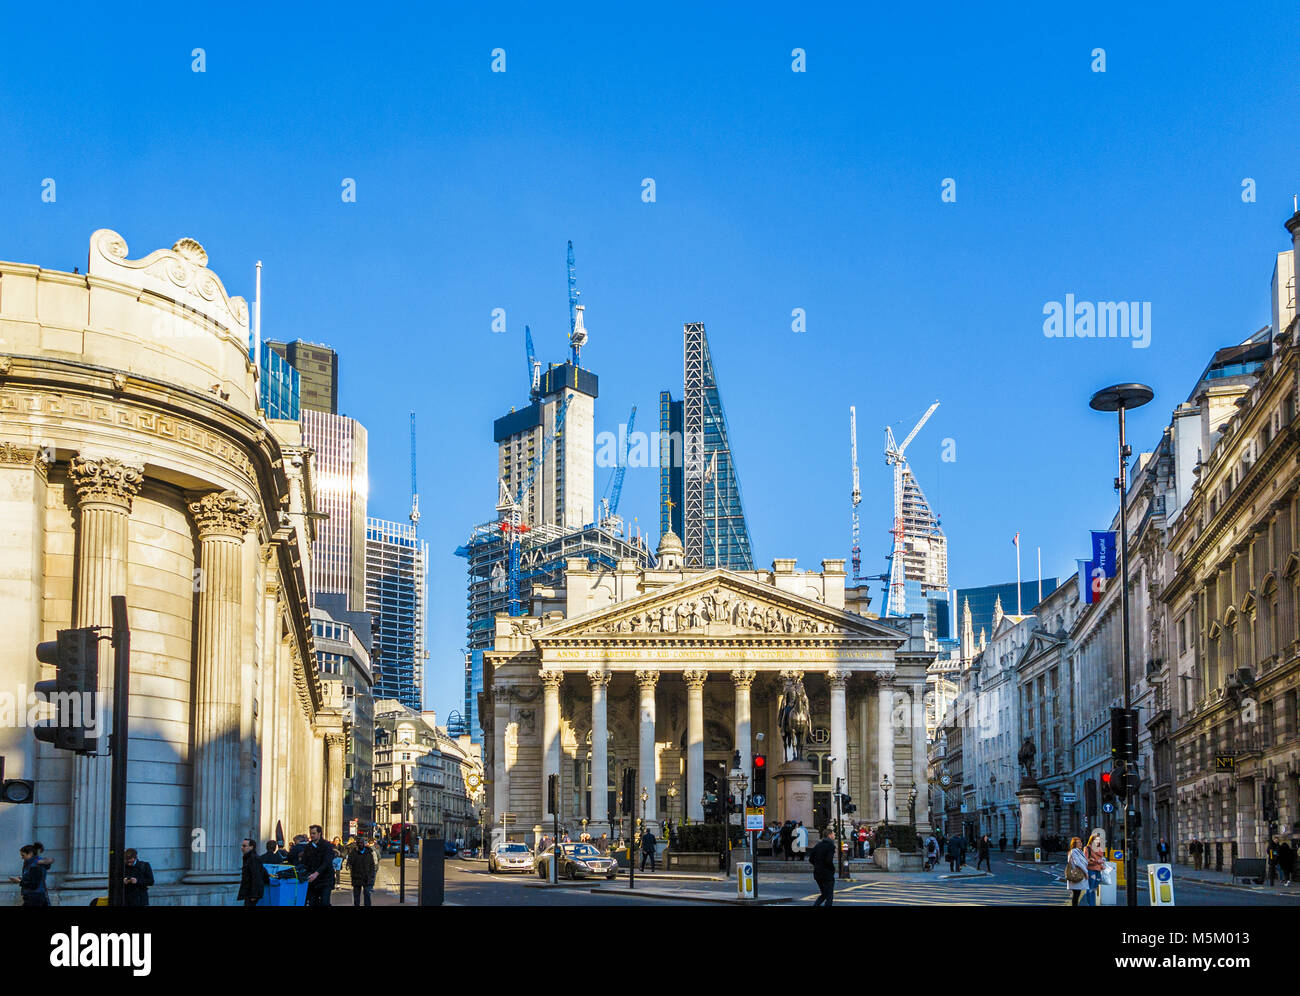 London EC3: 22 Bishopsgate, the Cheesegrater and the Scalpel rise behind the Royal Exchange, seen from Cornhill/Threadneedle Street junction Stock Photo